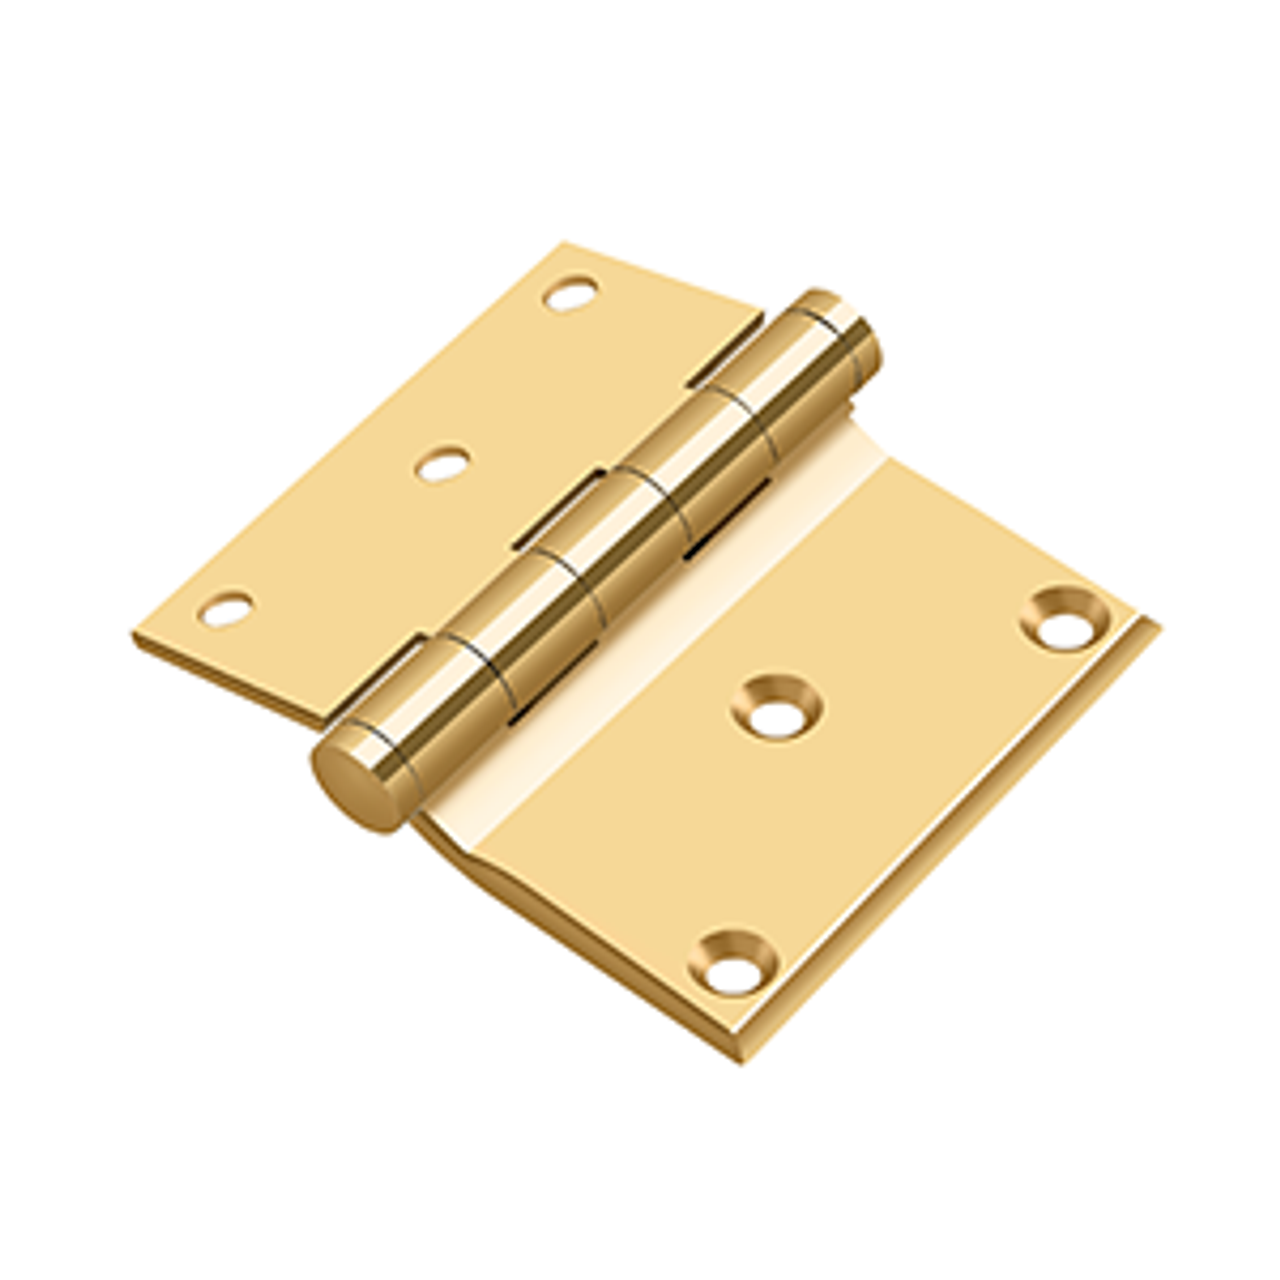 Deltana DHS3035 3" X 3-1/2" HALF SURFACE HINGE SOLID BRASS